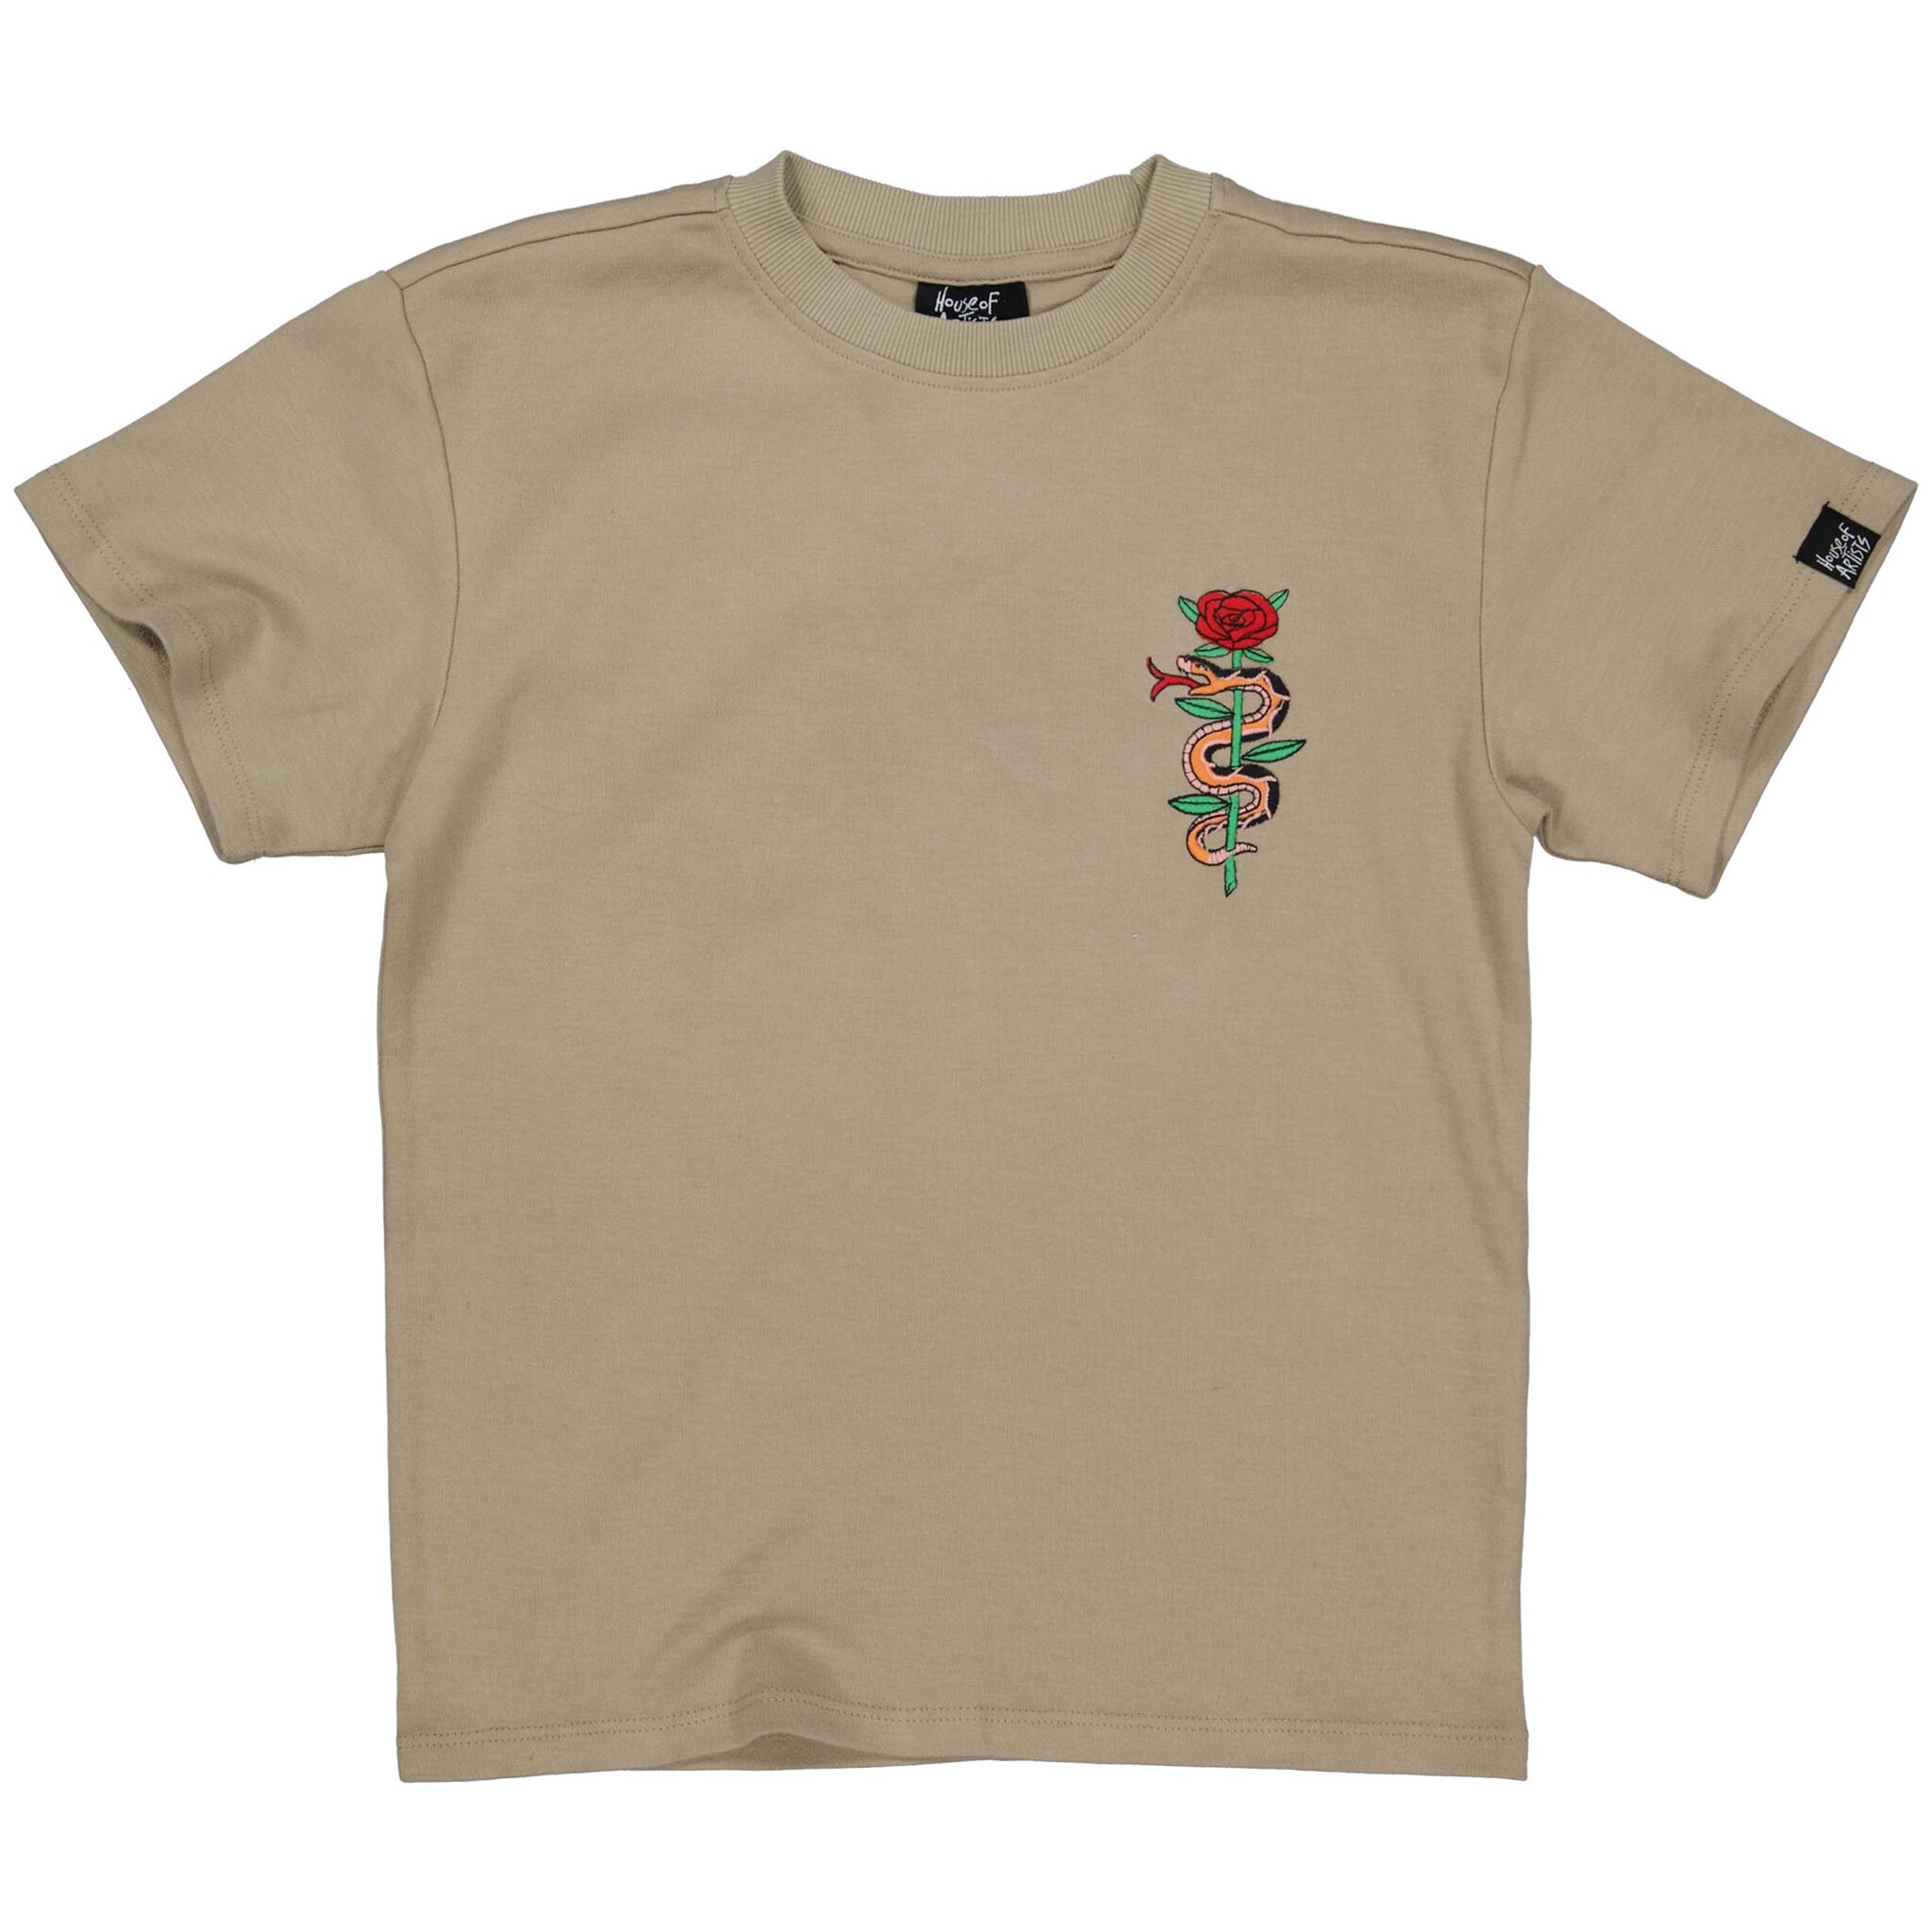 House of artists T-shirt - Taupe